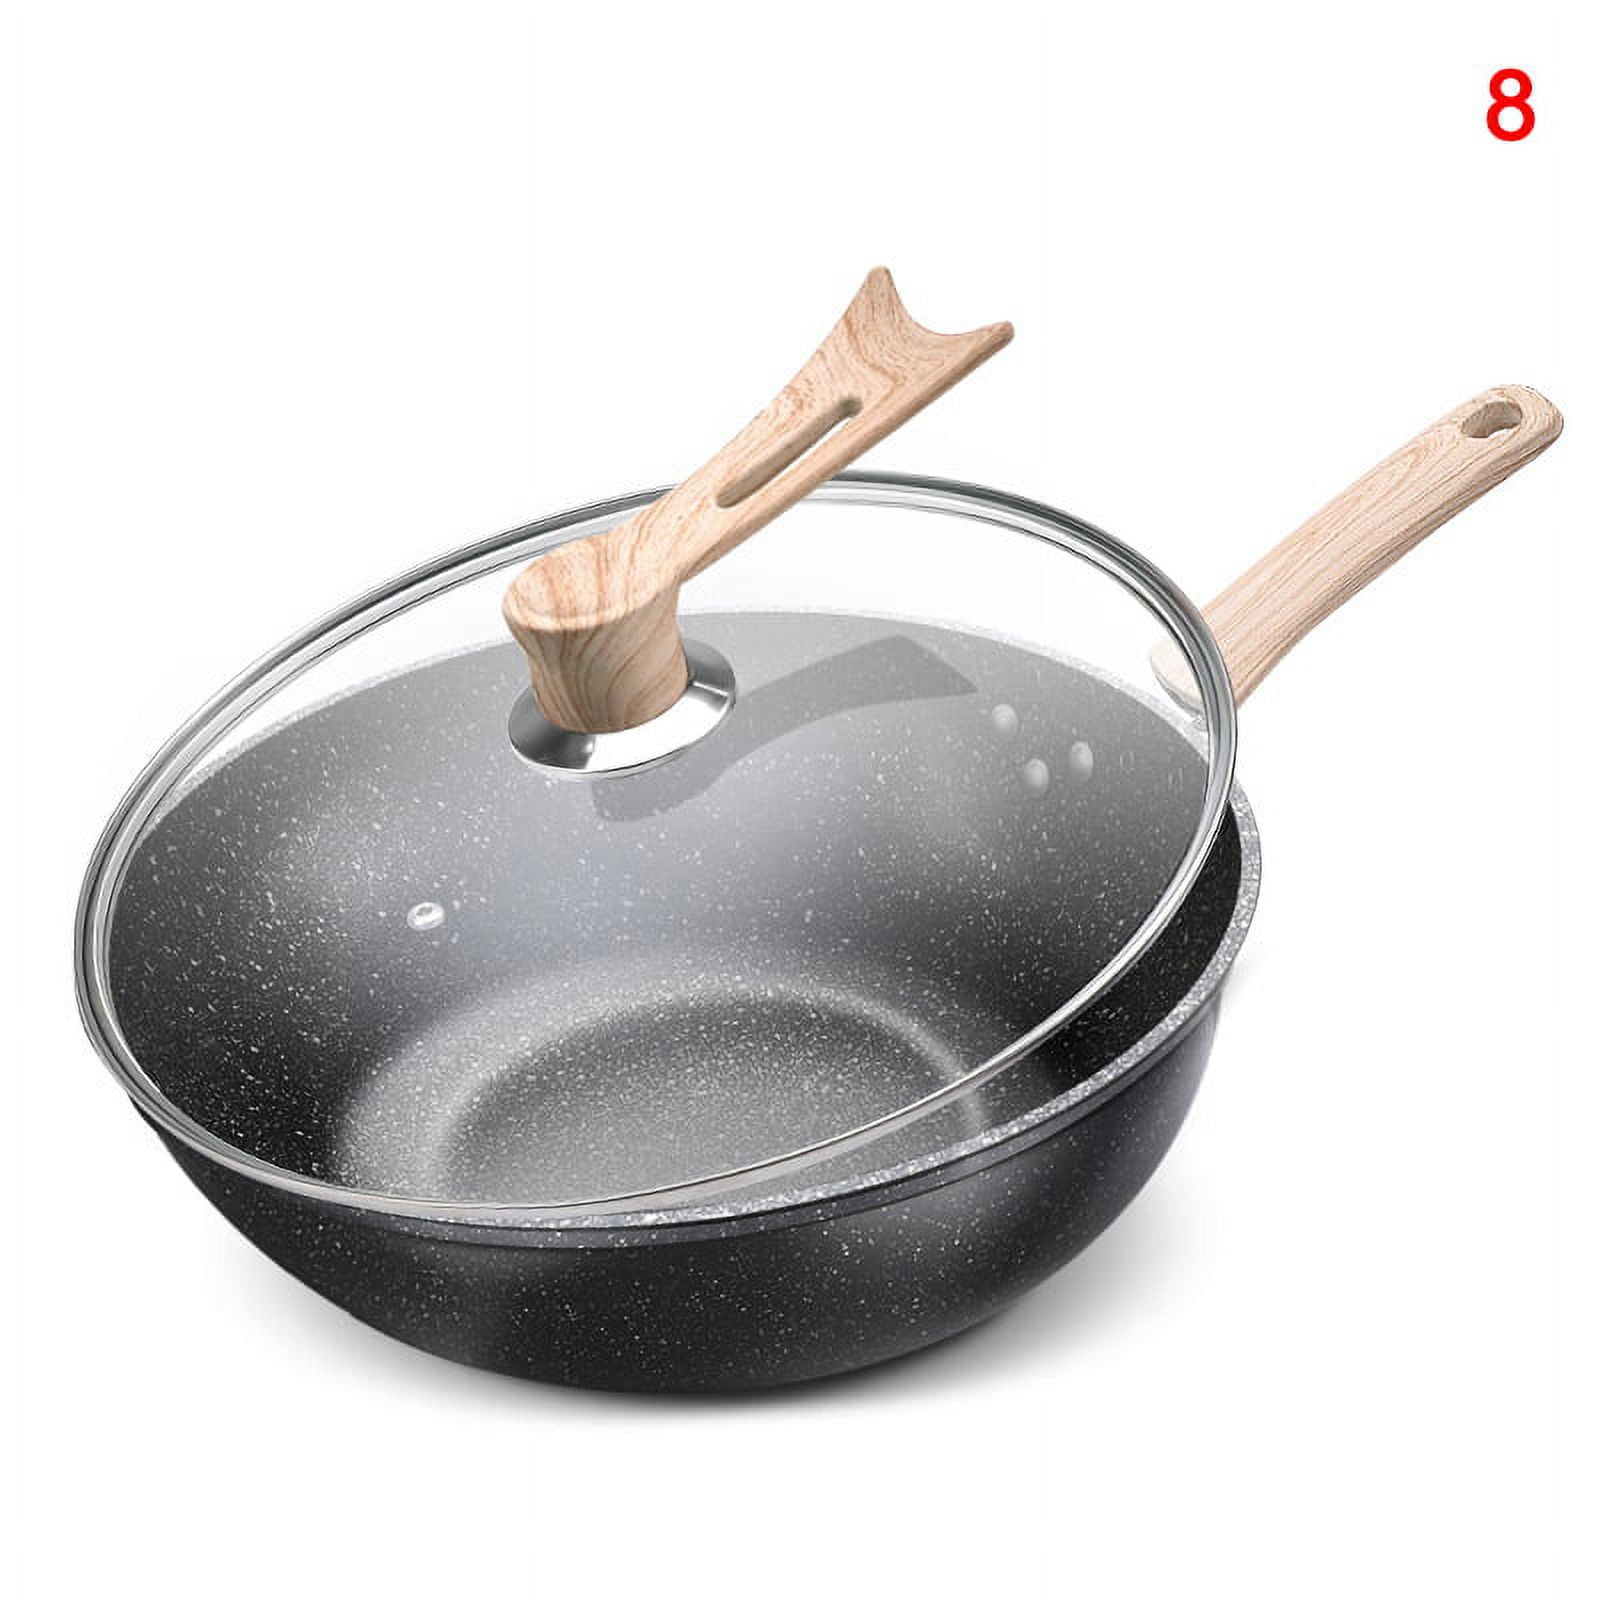 Ecowin Nonstick Deep Frying Pan Skillet with Lid, 10 Inch/ 3Qt Granite  Coating Saute Pan, Non Stick Fry Pan for Cooking with Bakelite Handle